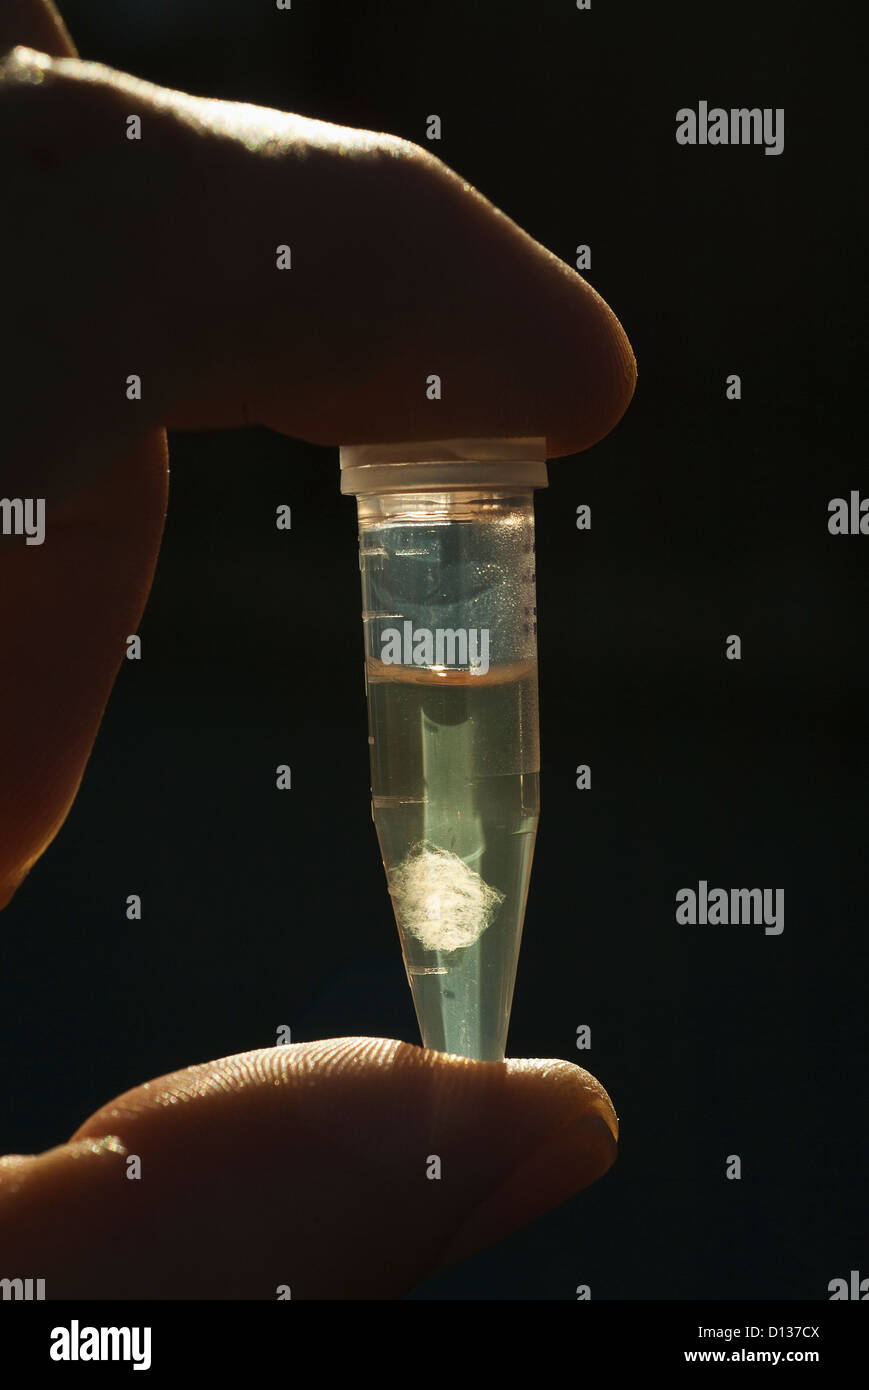 Dna Isolated From A Drop Of Bird Blood And Suspended In Isopropanol Stock Photo